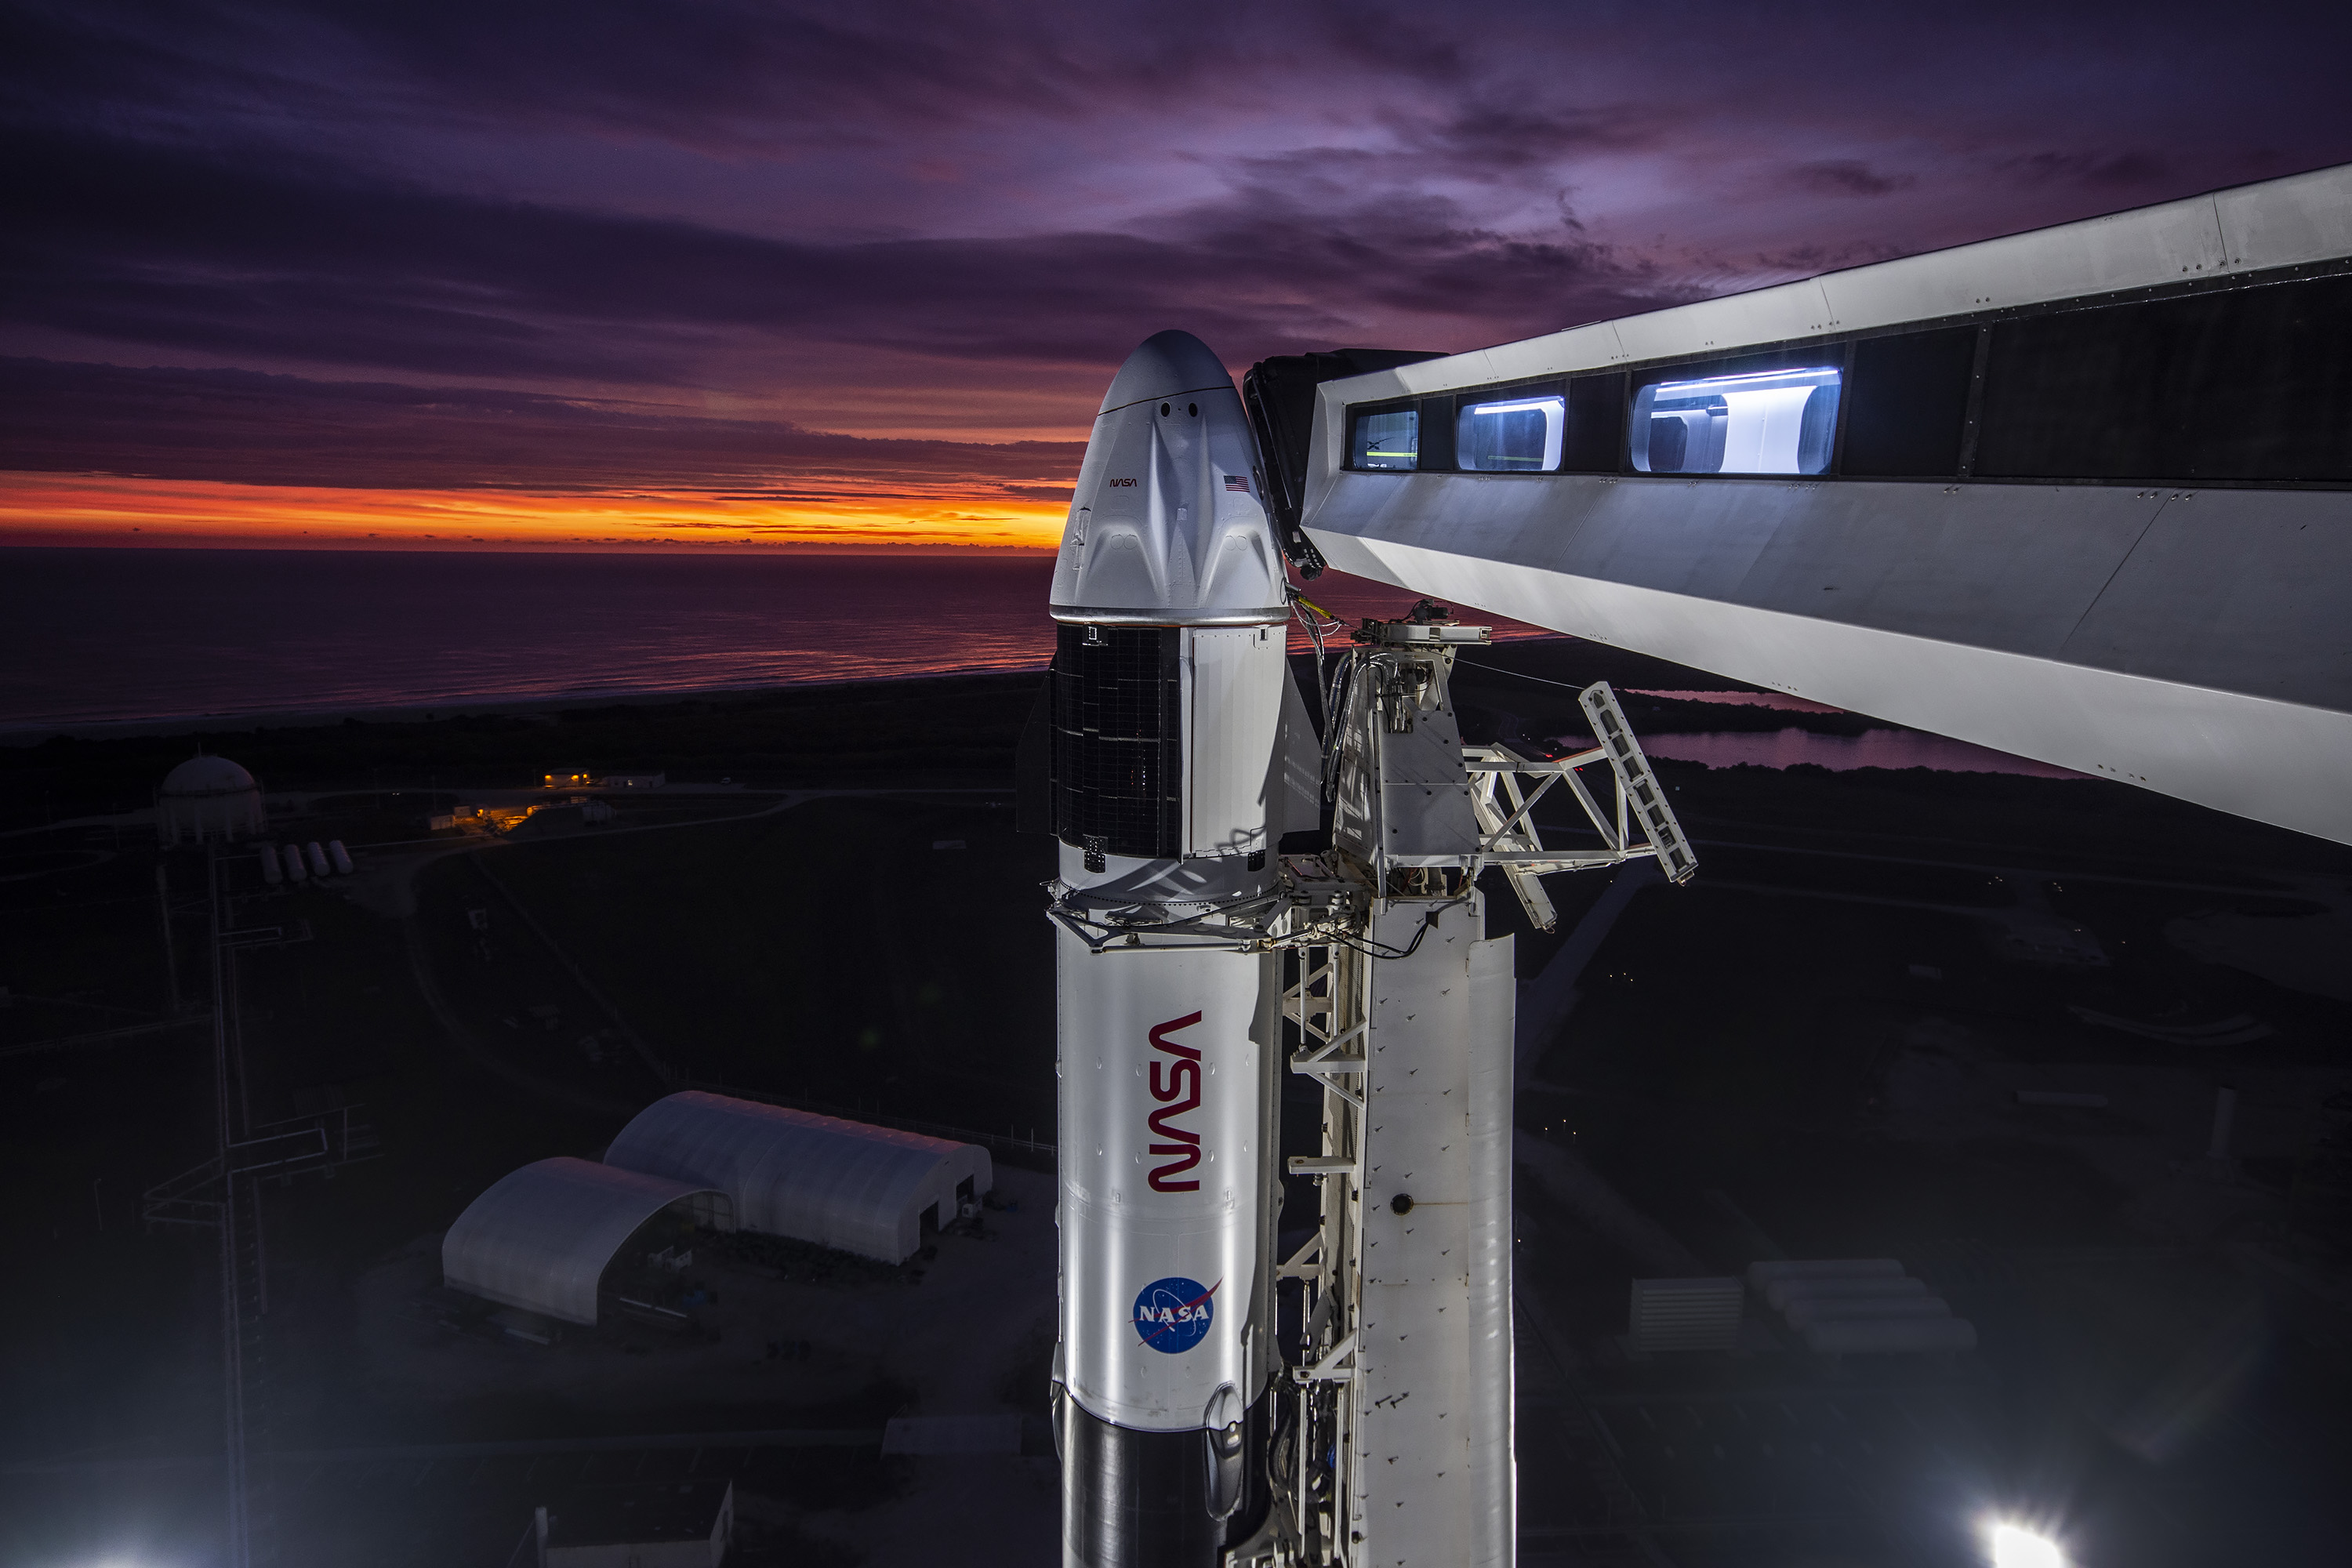 A close-up view of the SpaceX Falcon 9 rocket vertical with the Crew Dragon atop for the Crew-3 mission at Launch Pad 39A at NASA’s Kennedy Space Center in Florida during sunrise on Oct. 28, 2021. Also in view is the crew access arm.